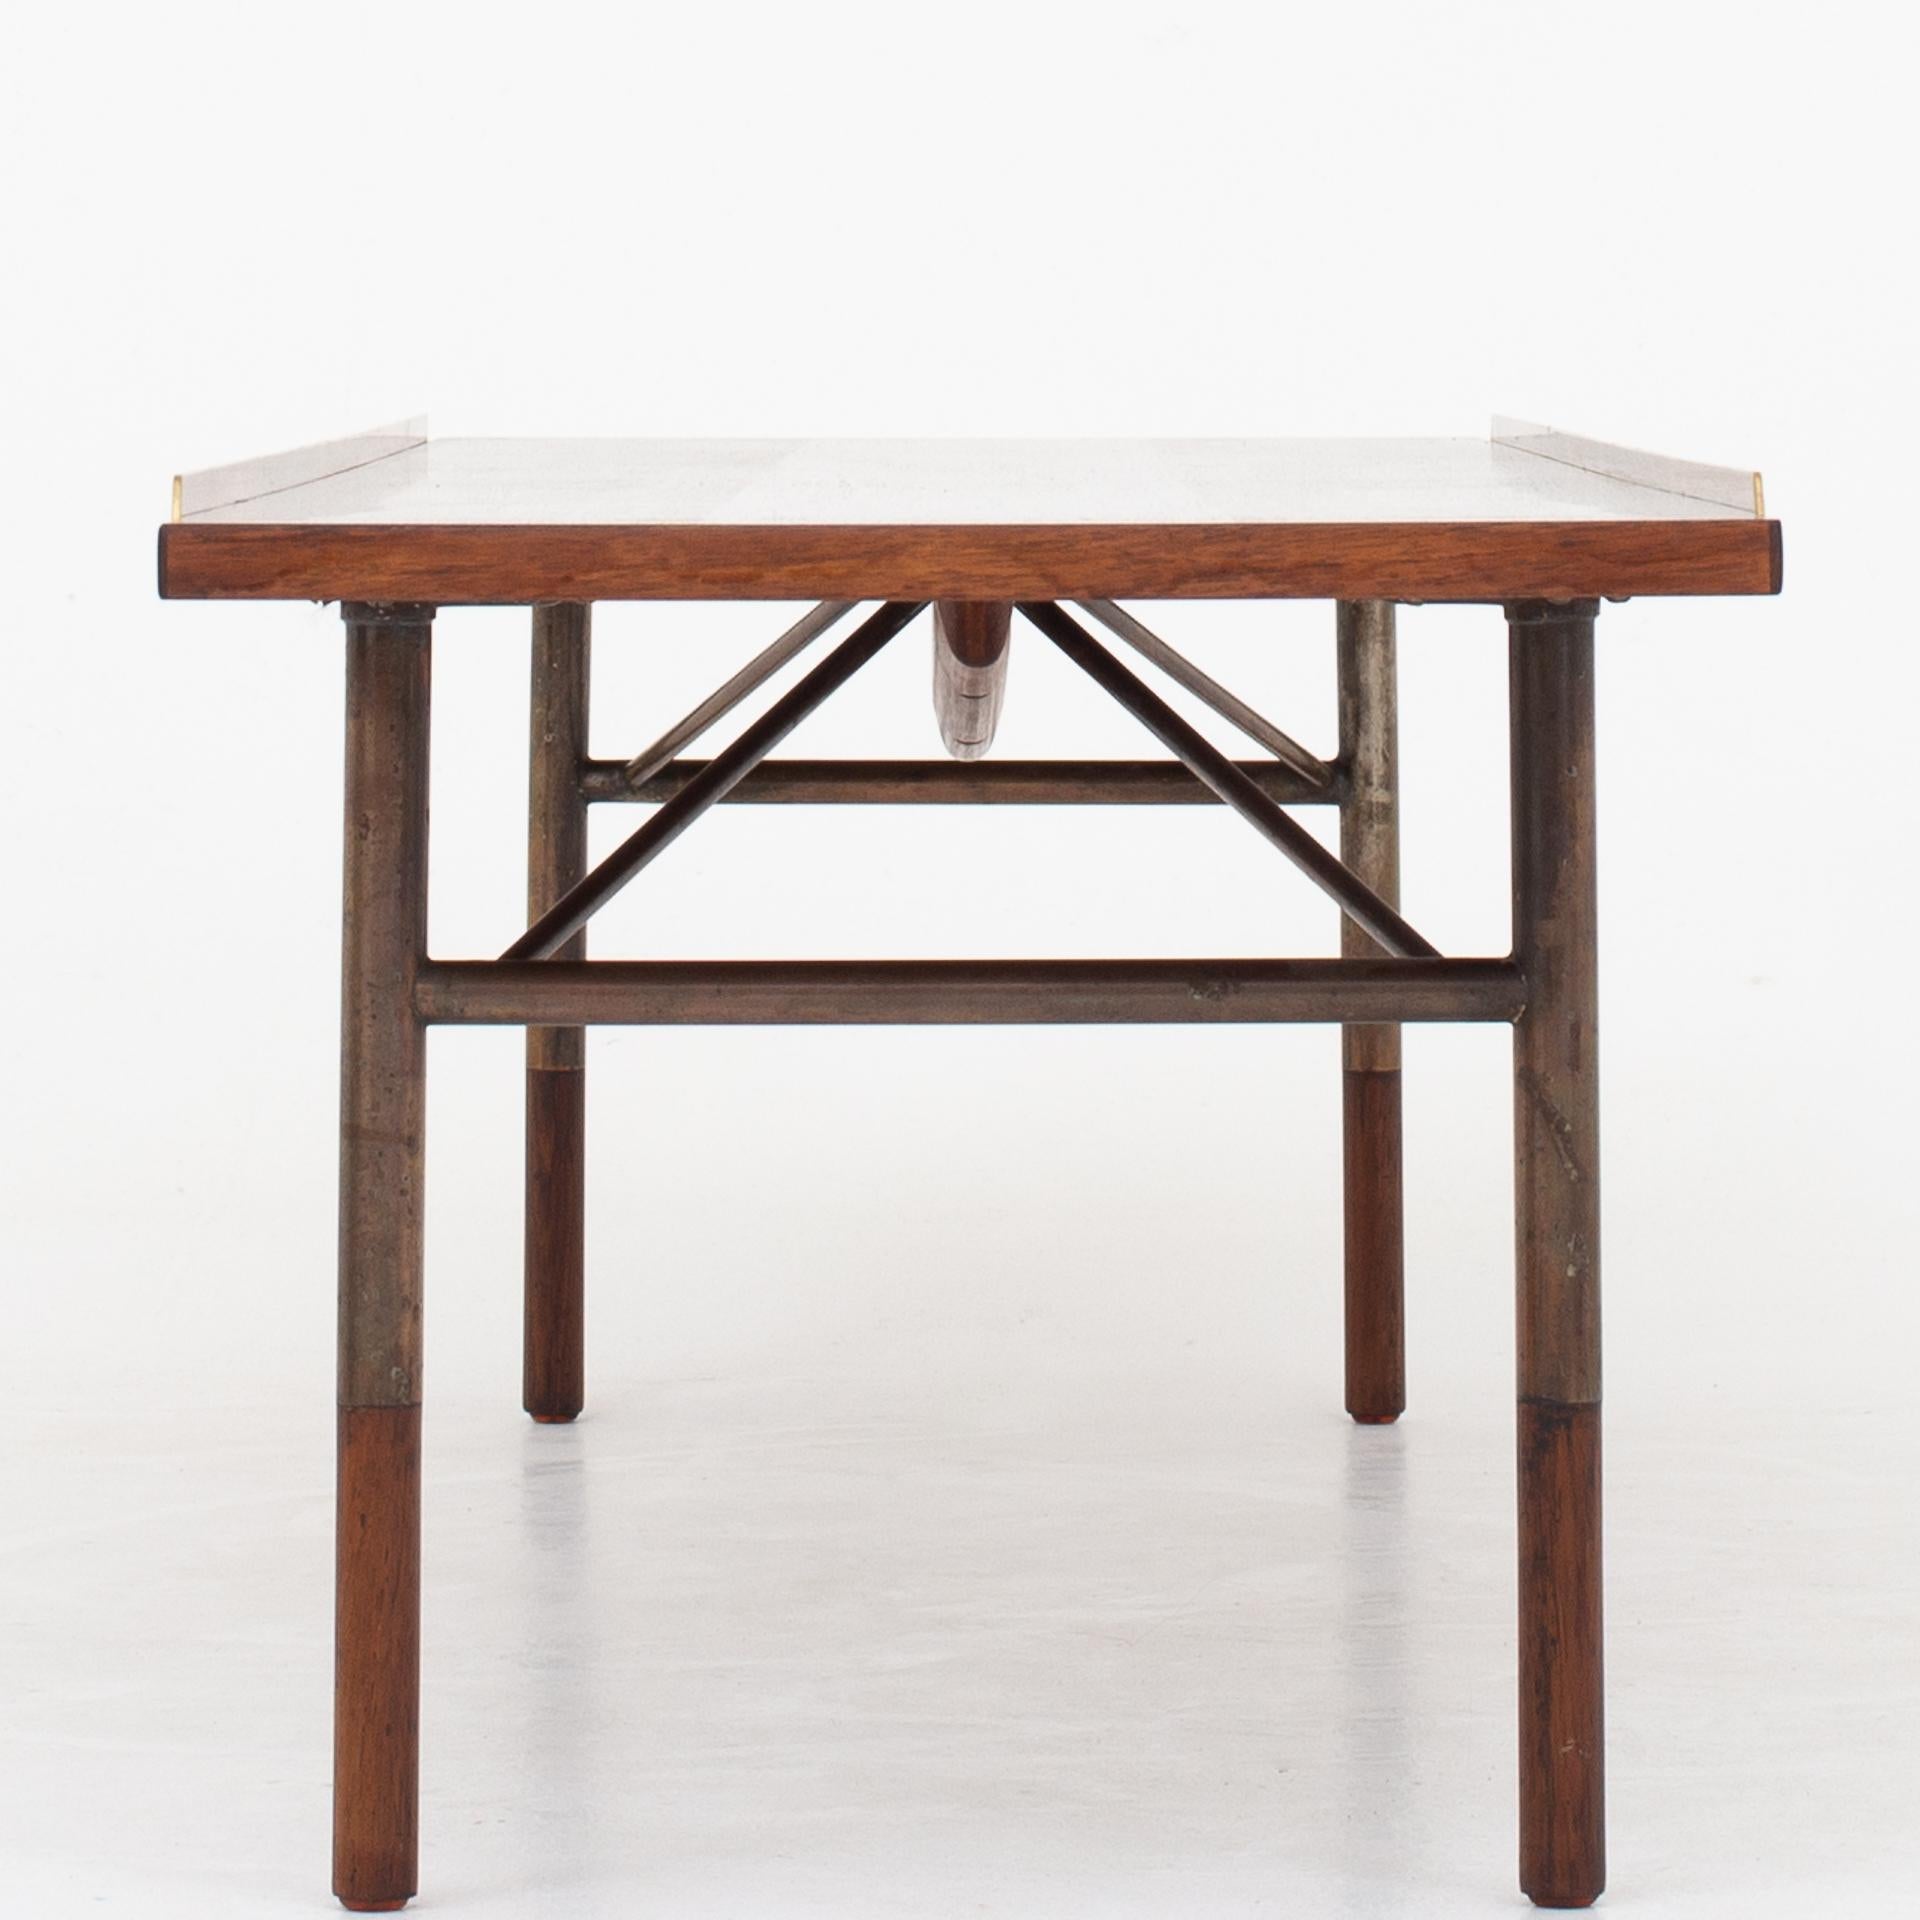 BO 101, bench/coffee table in rosewood, brass and anodized metal. Designed in 1953. Maker Bovirke.